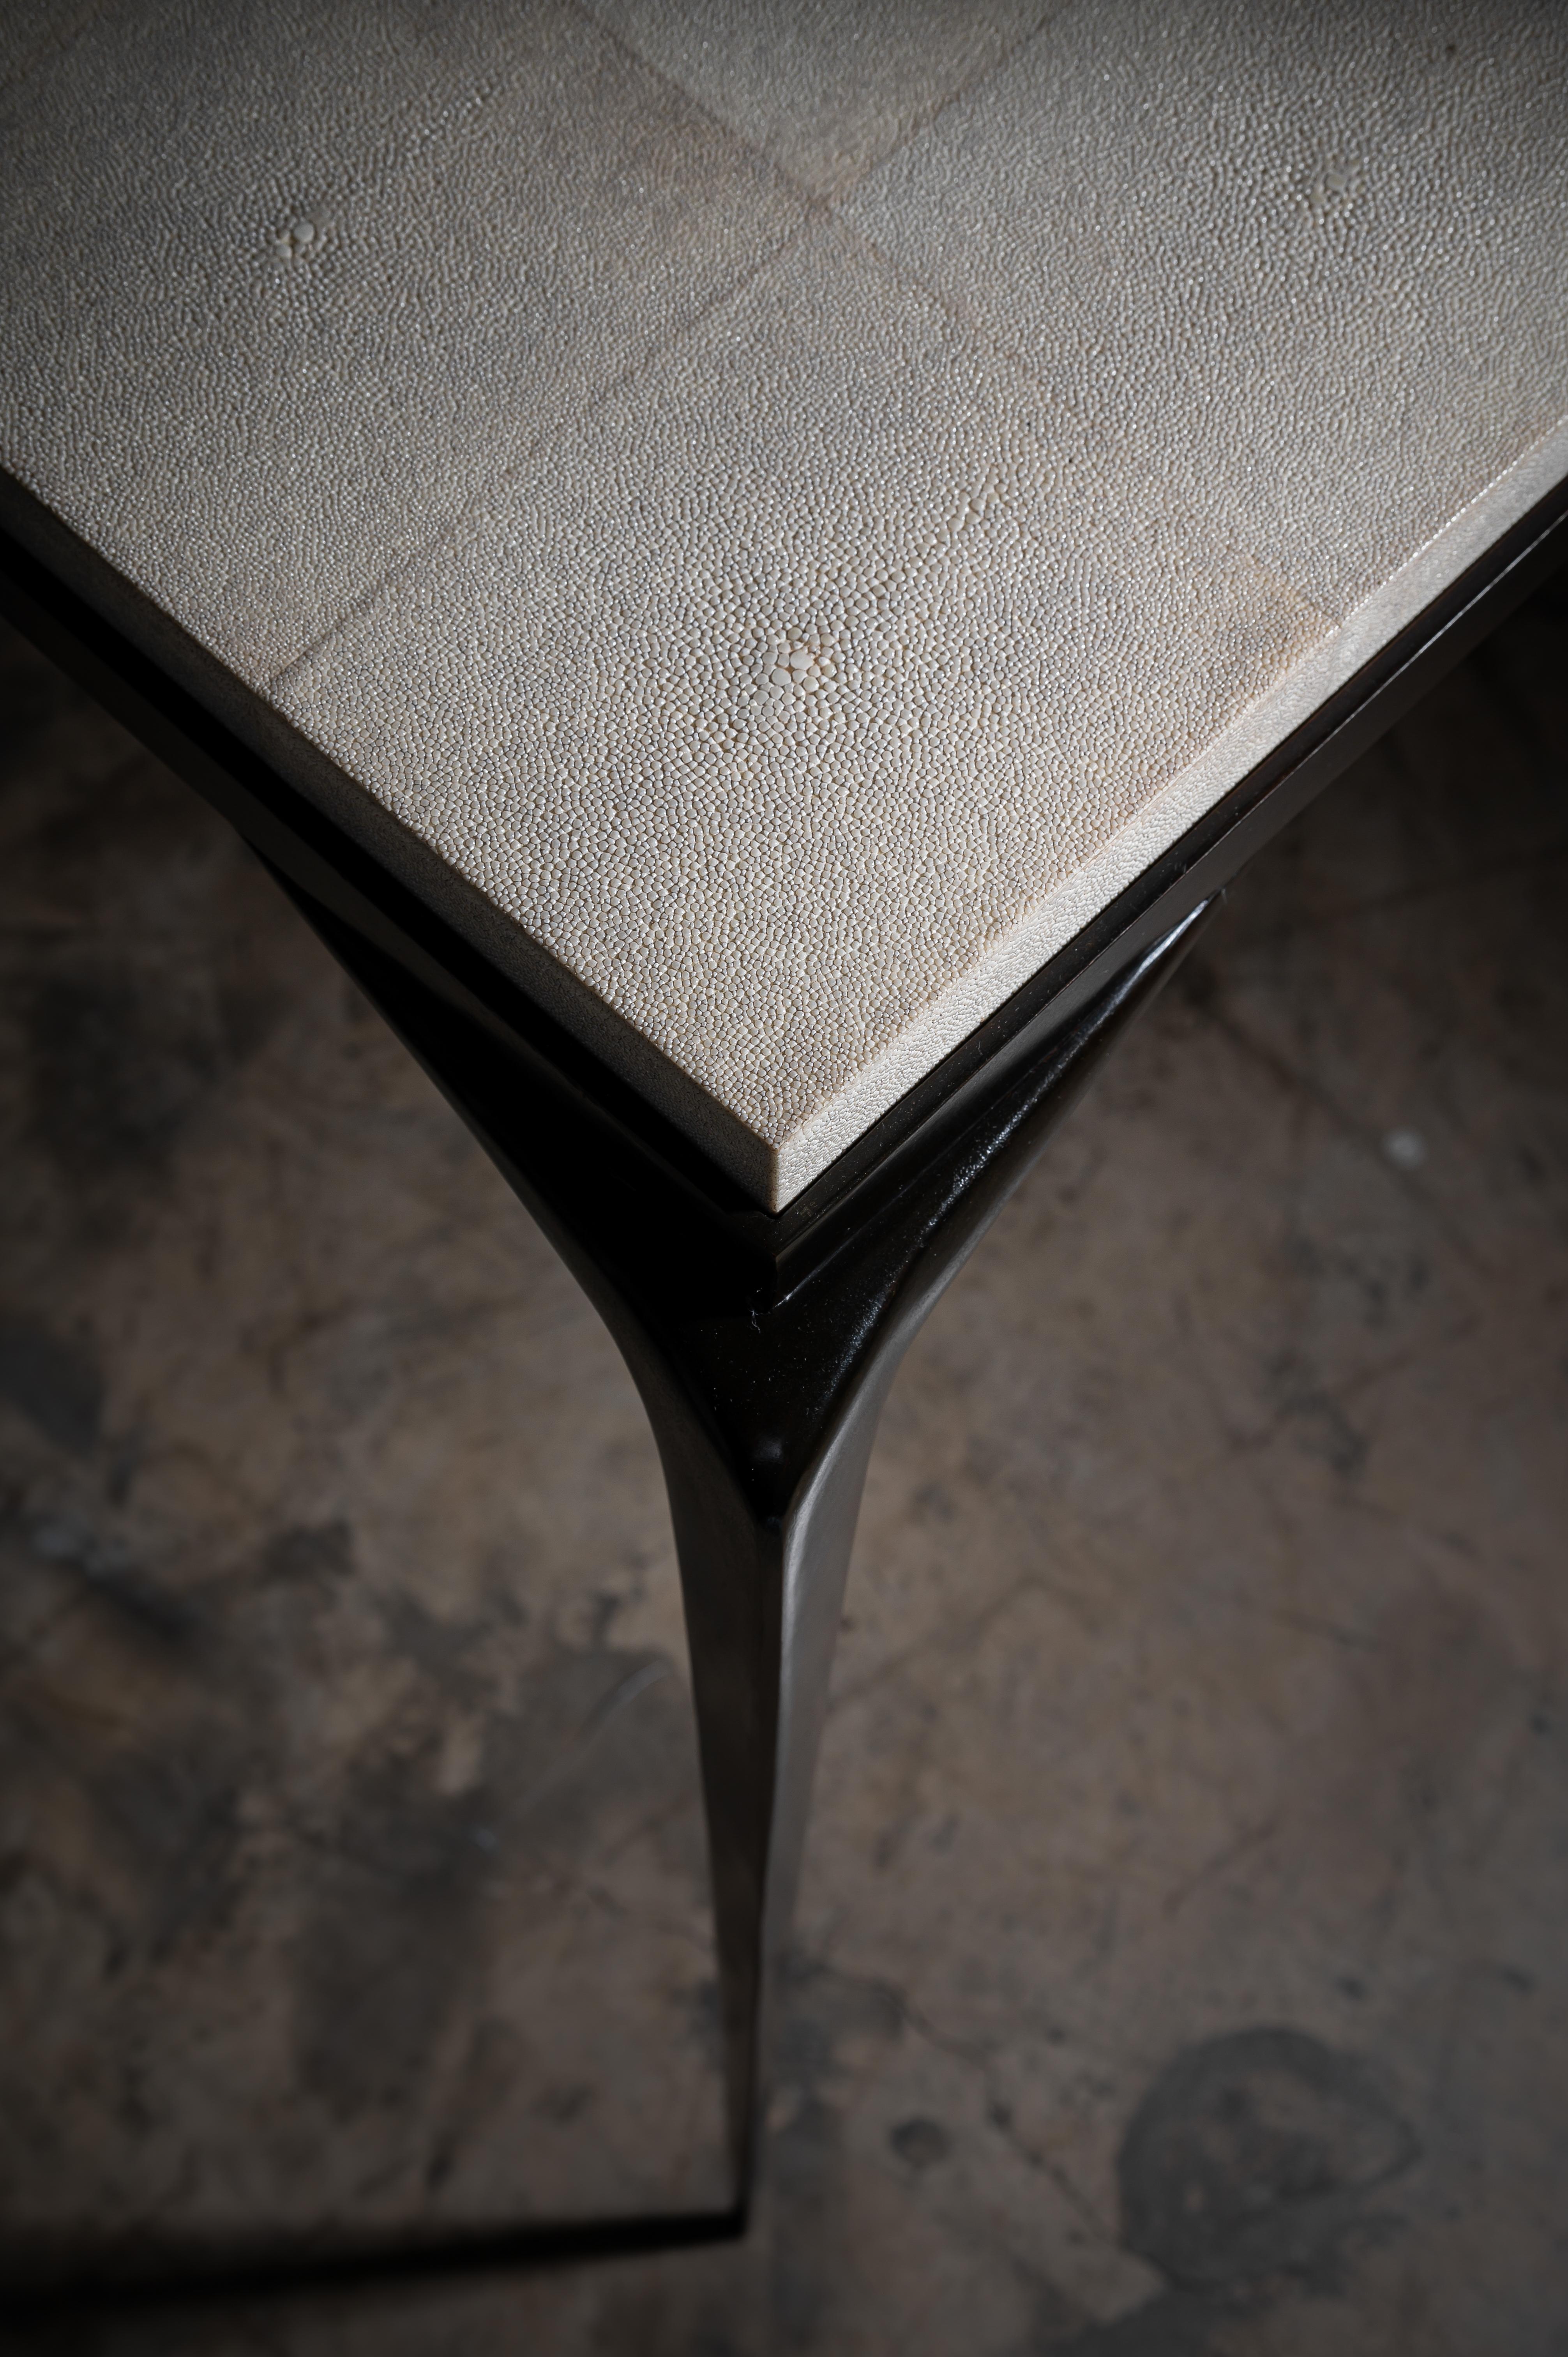 Hubert Table, Large, in Cast Bronze and Shagreen from Elan Atelier

The Hubert is a truly elegant form, a nod to the sculptural prowess of artists such as Louise Bourgeois and the well-loved materials used by artisans like Jean-Michel Frank. A